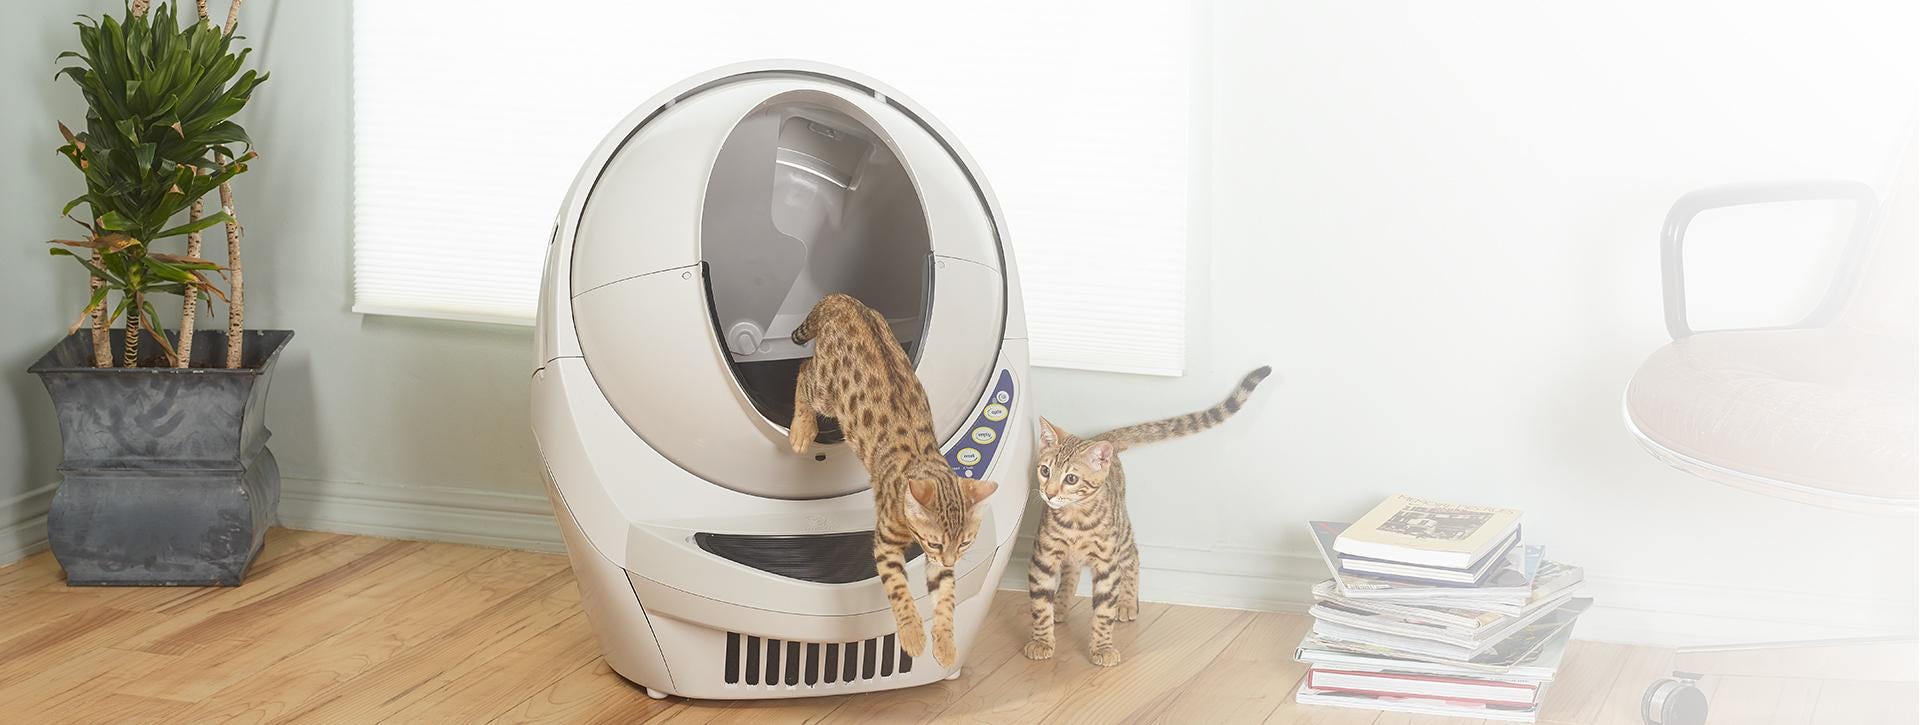 Automatic Self-Cleaning Litter Box for Cats | Litter-Robot™